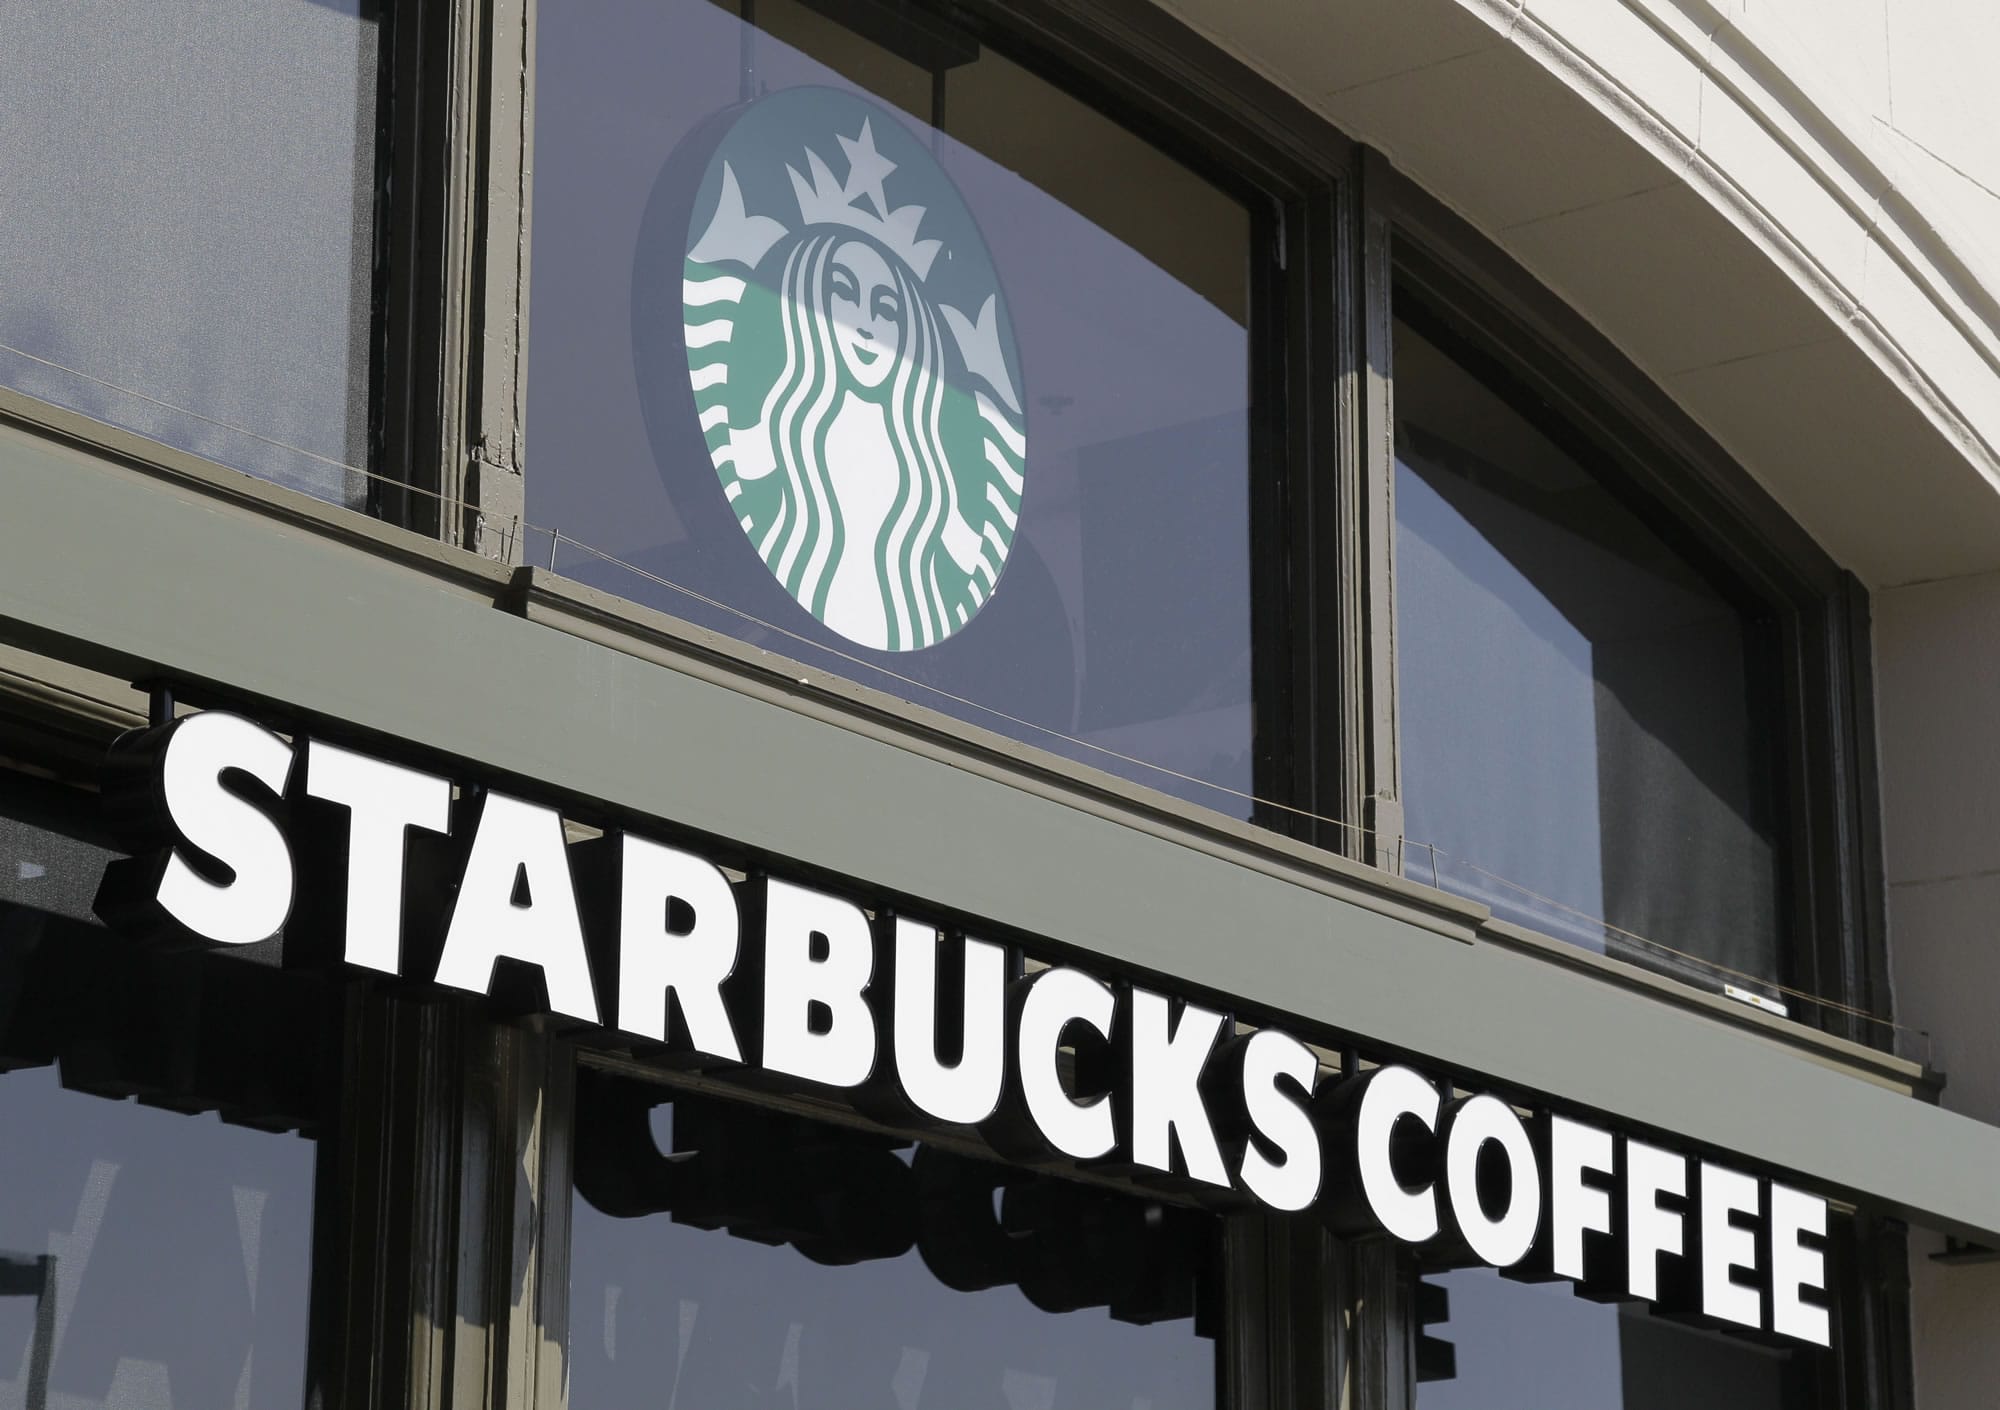 Starbucks is lowering the list price of its bagged coffee to stay competitive as commodity costs ease across the industry, the company announced Friday.